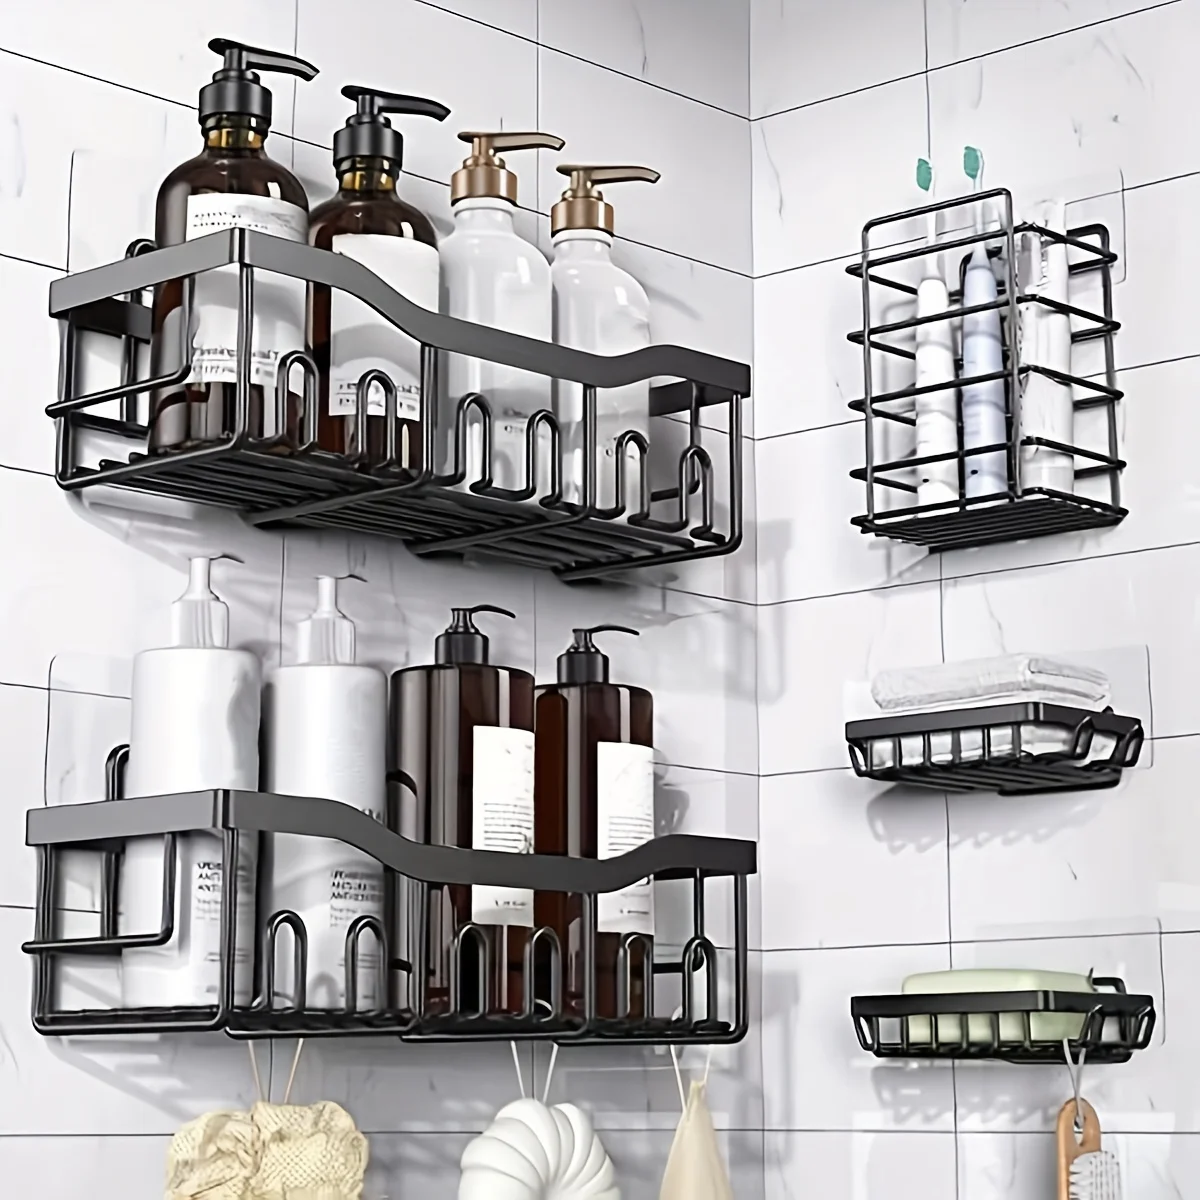 https://ae01.alicdn.com/kf/S9b7ad52cc2024e15893d5b274793cab7q/Shower-Caddy-Adhesive-Shower-Organizer-for-Bathroom-Storage-Kitchen-No-Drilling-Large-Capacity-Rustproof-Stainless-Steel.jpg